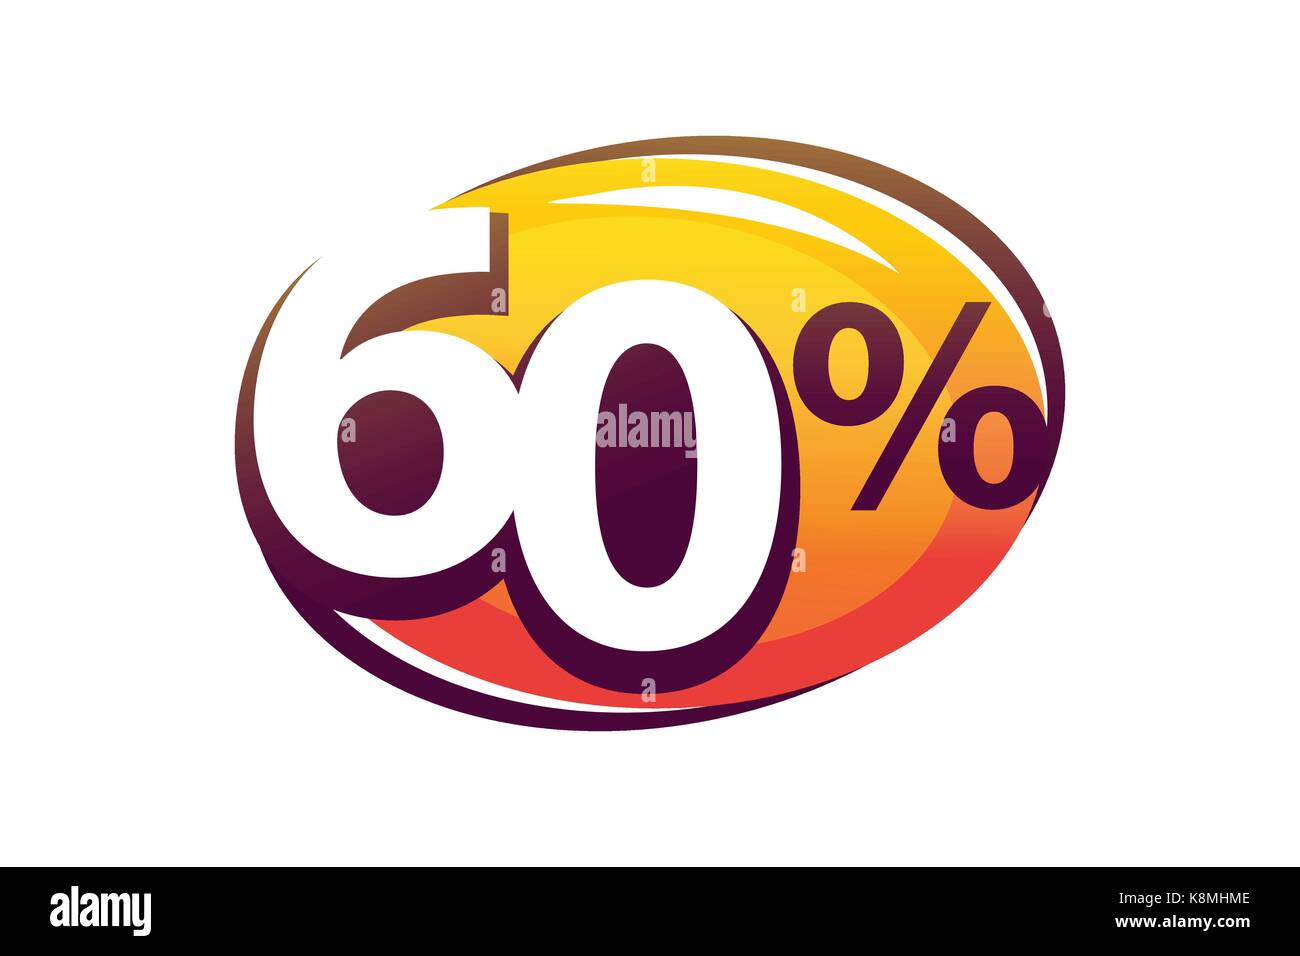 Bold Sixty Percent Within A Modern Oval Shape Illustration Design